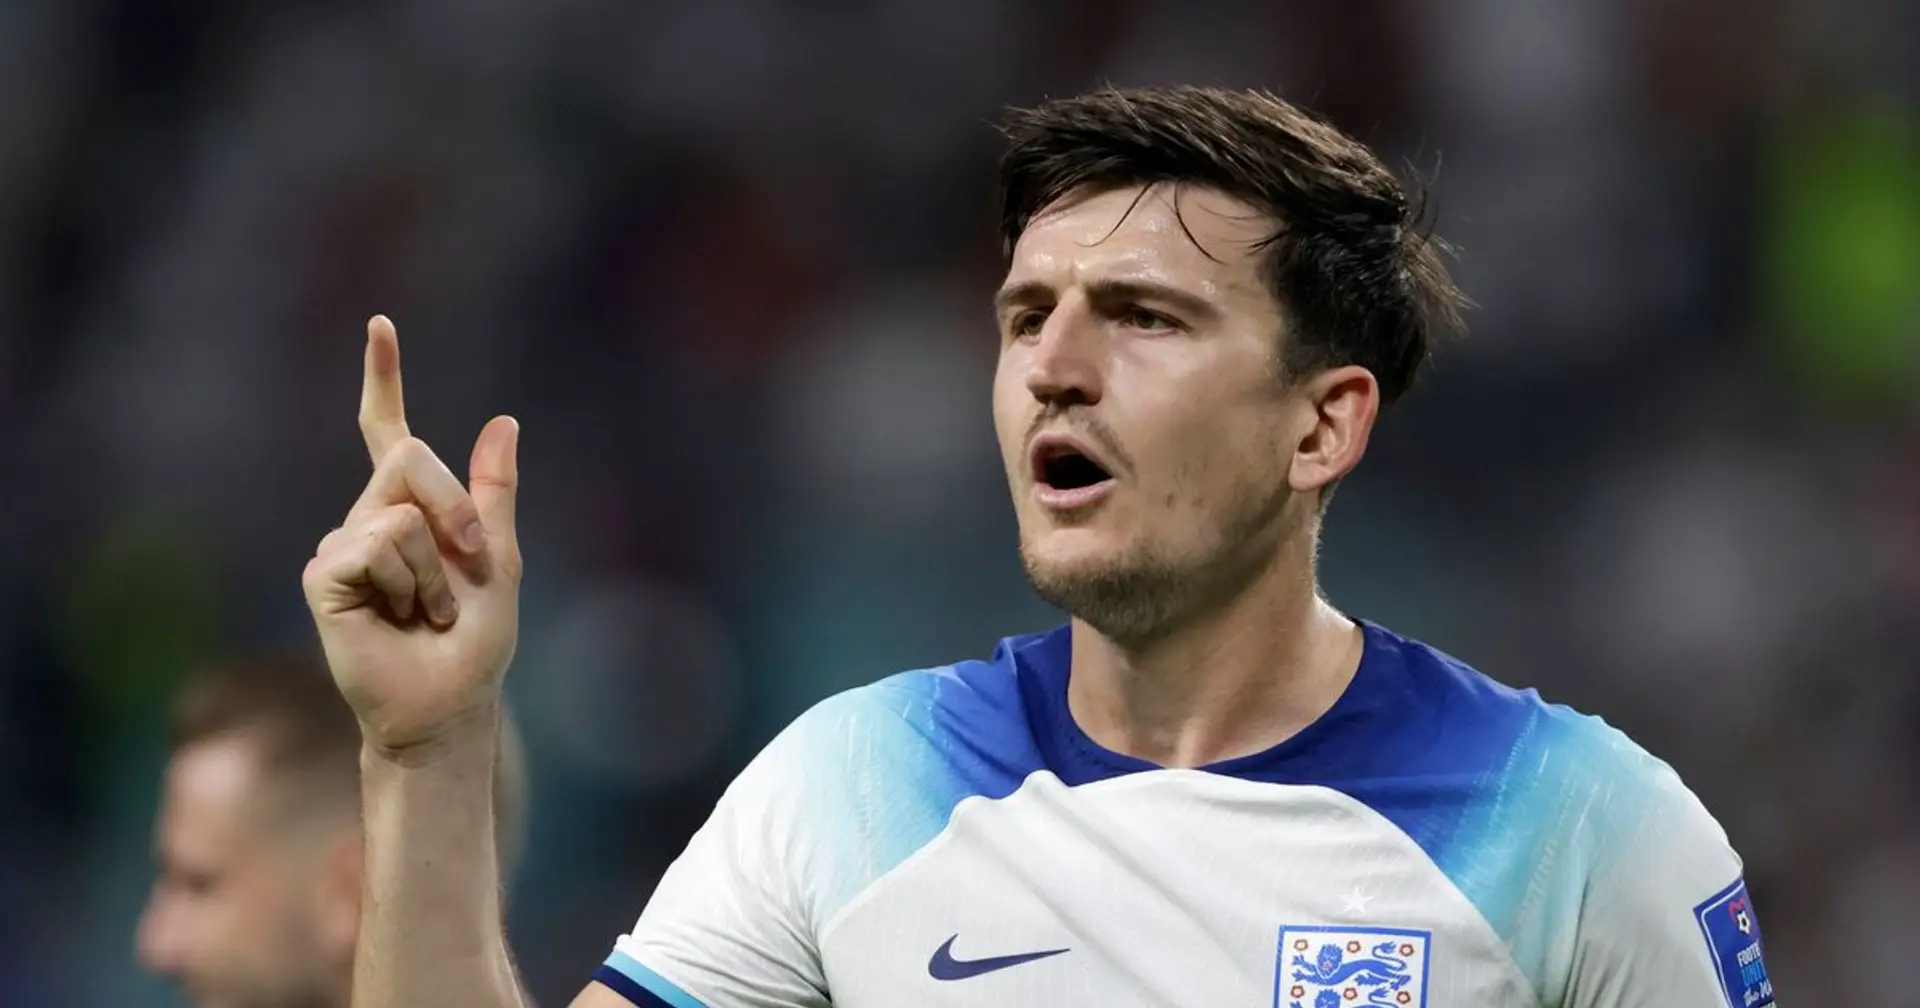 'He played like the Maguire we paid £80 for': Man United fans react to Harry' World Cup display for England